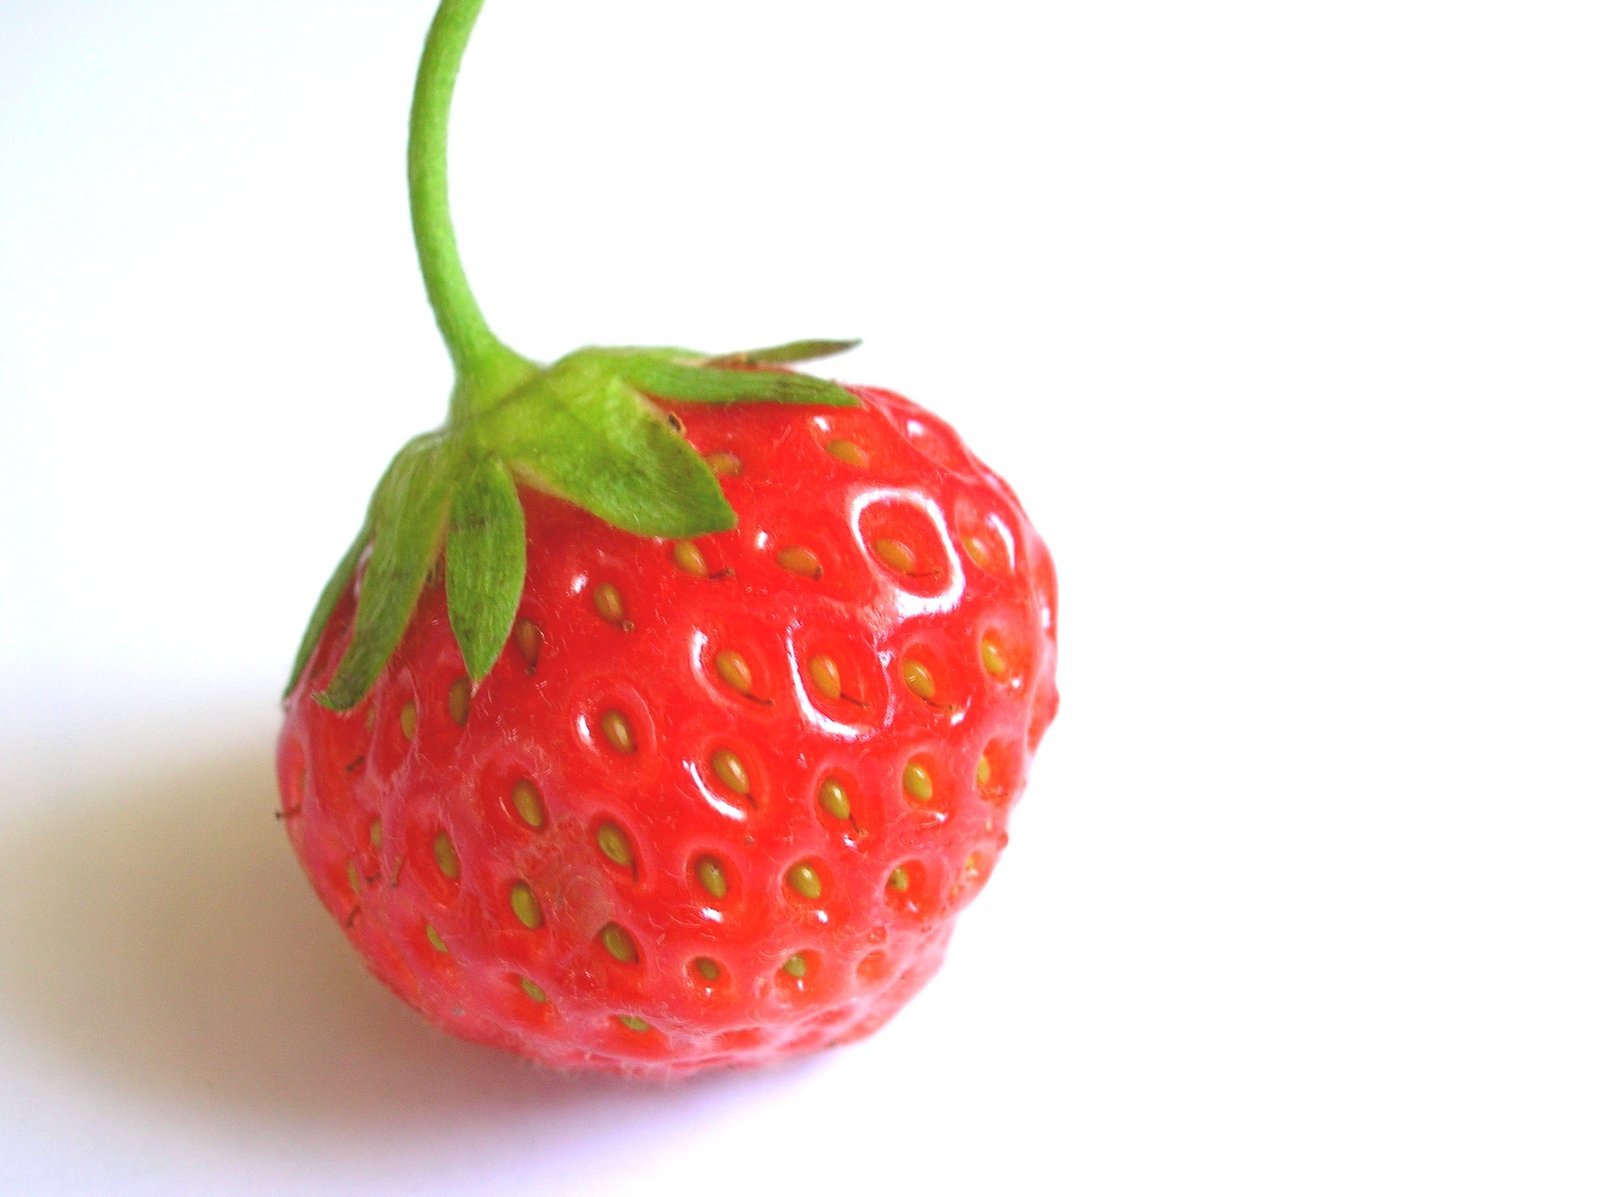 a close up of a red strawberry on a white table